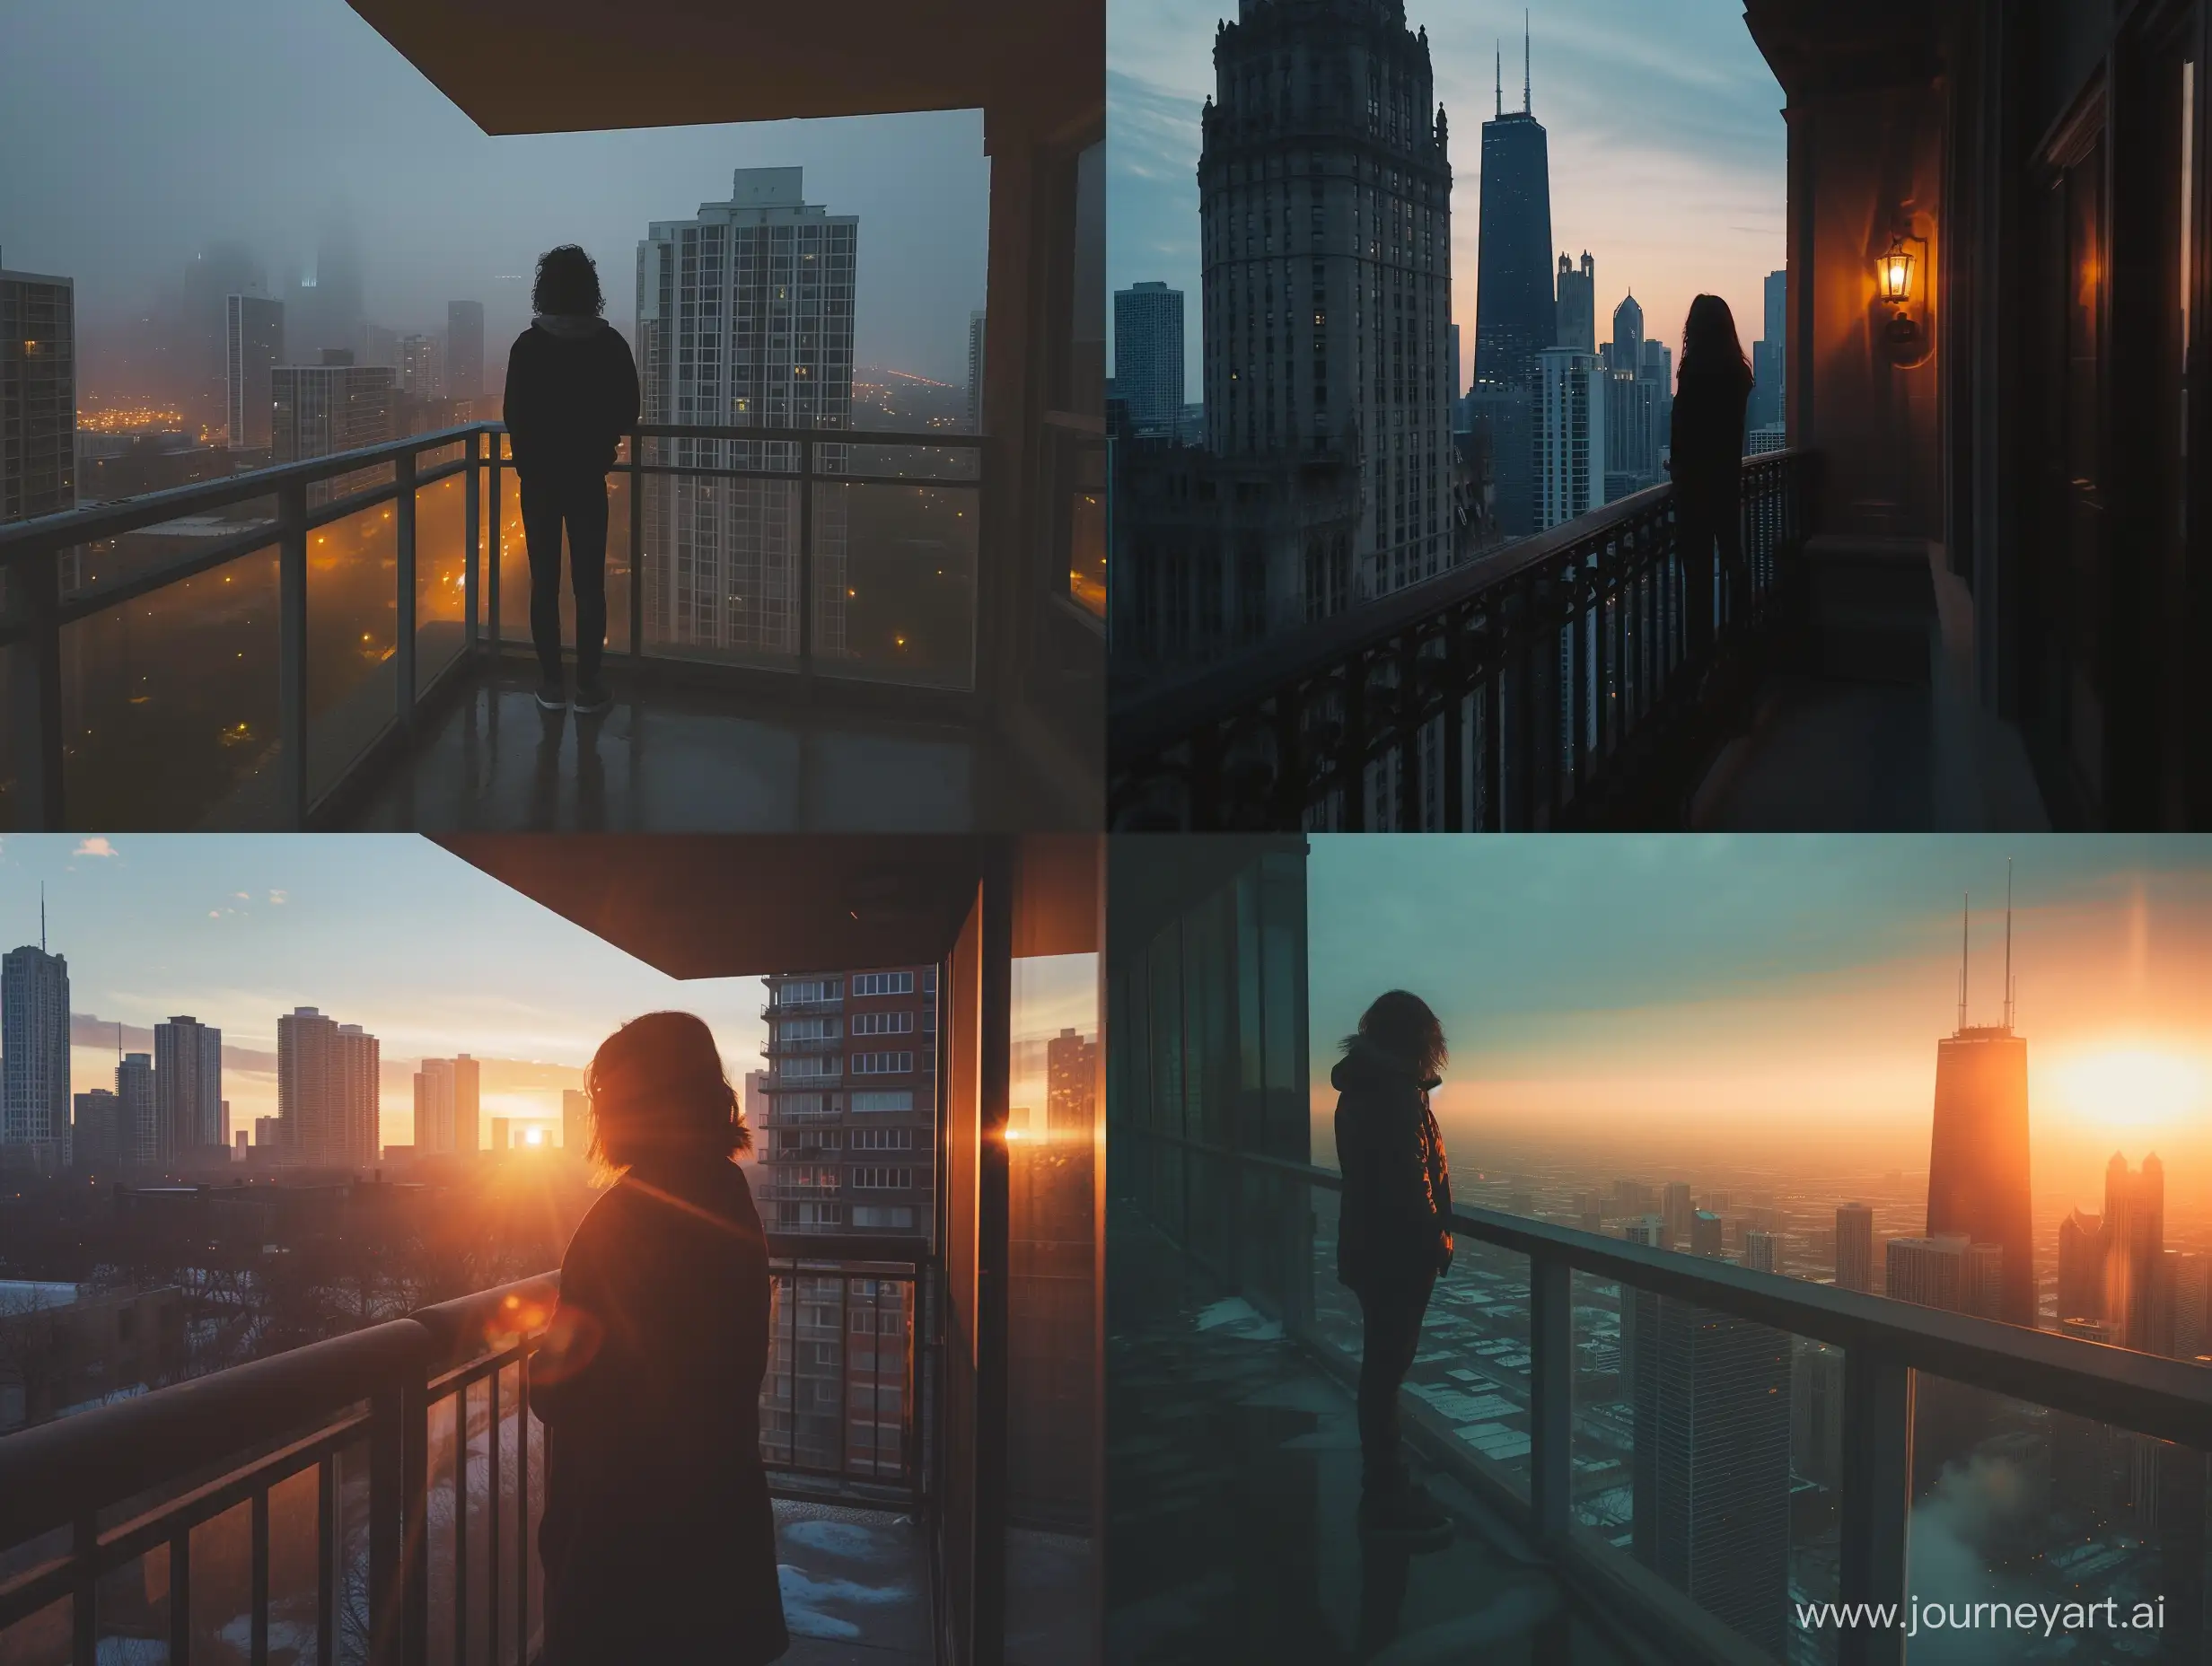 a phone photo of a person standing on the balcony, soft lighting, style raw posted on reddit in 2019, environment, looking at a city, Chicago, daytime,